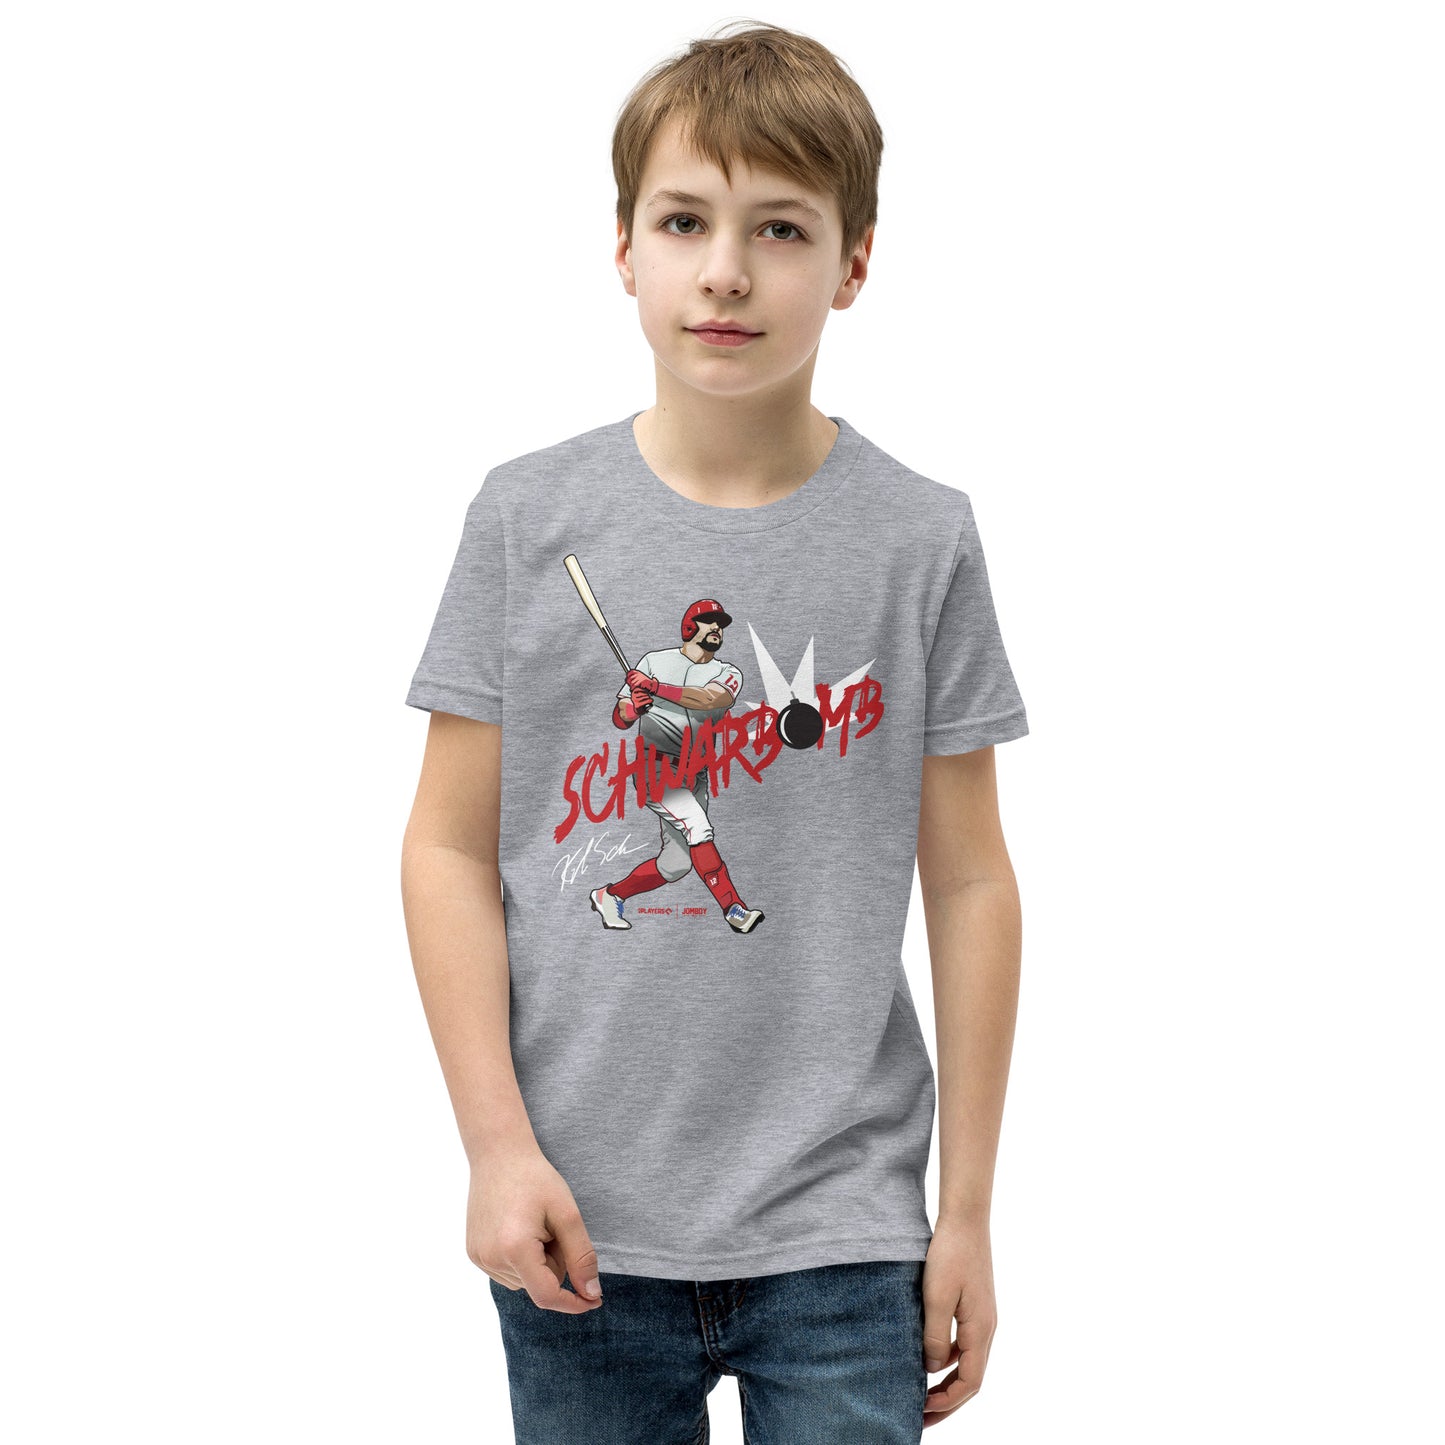 SchwarBOMB Signature Series | Youth T-Shirt